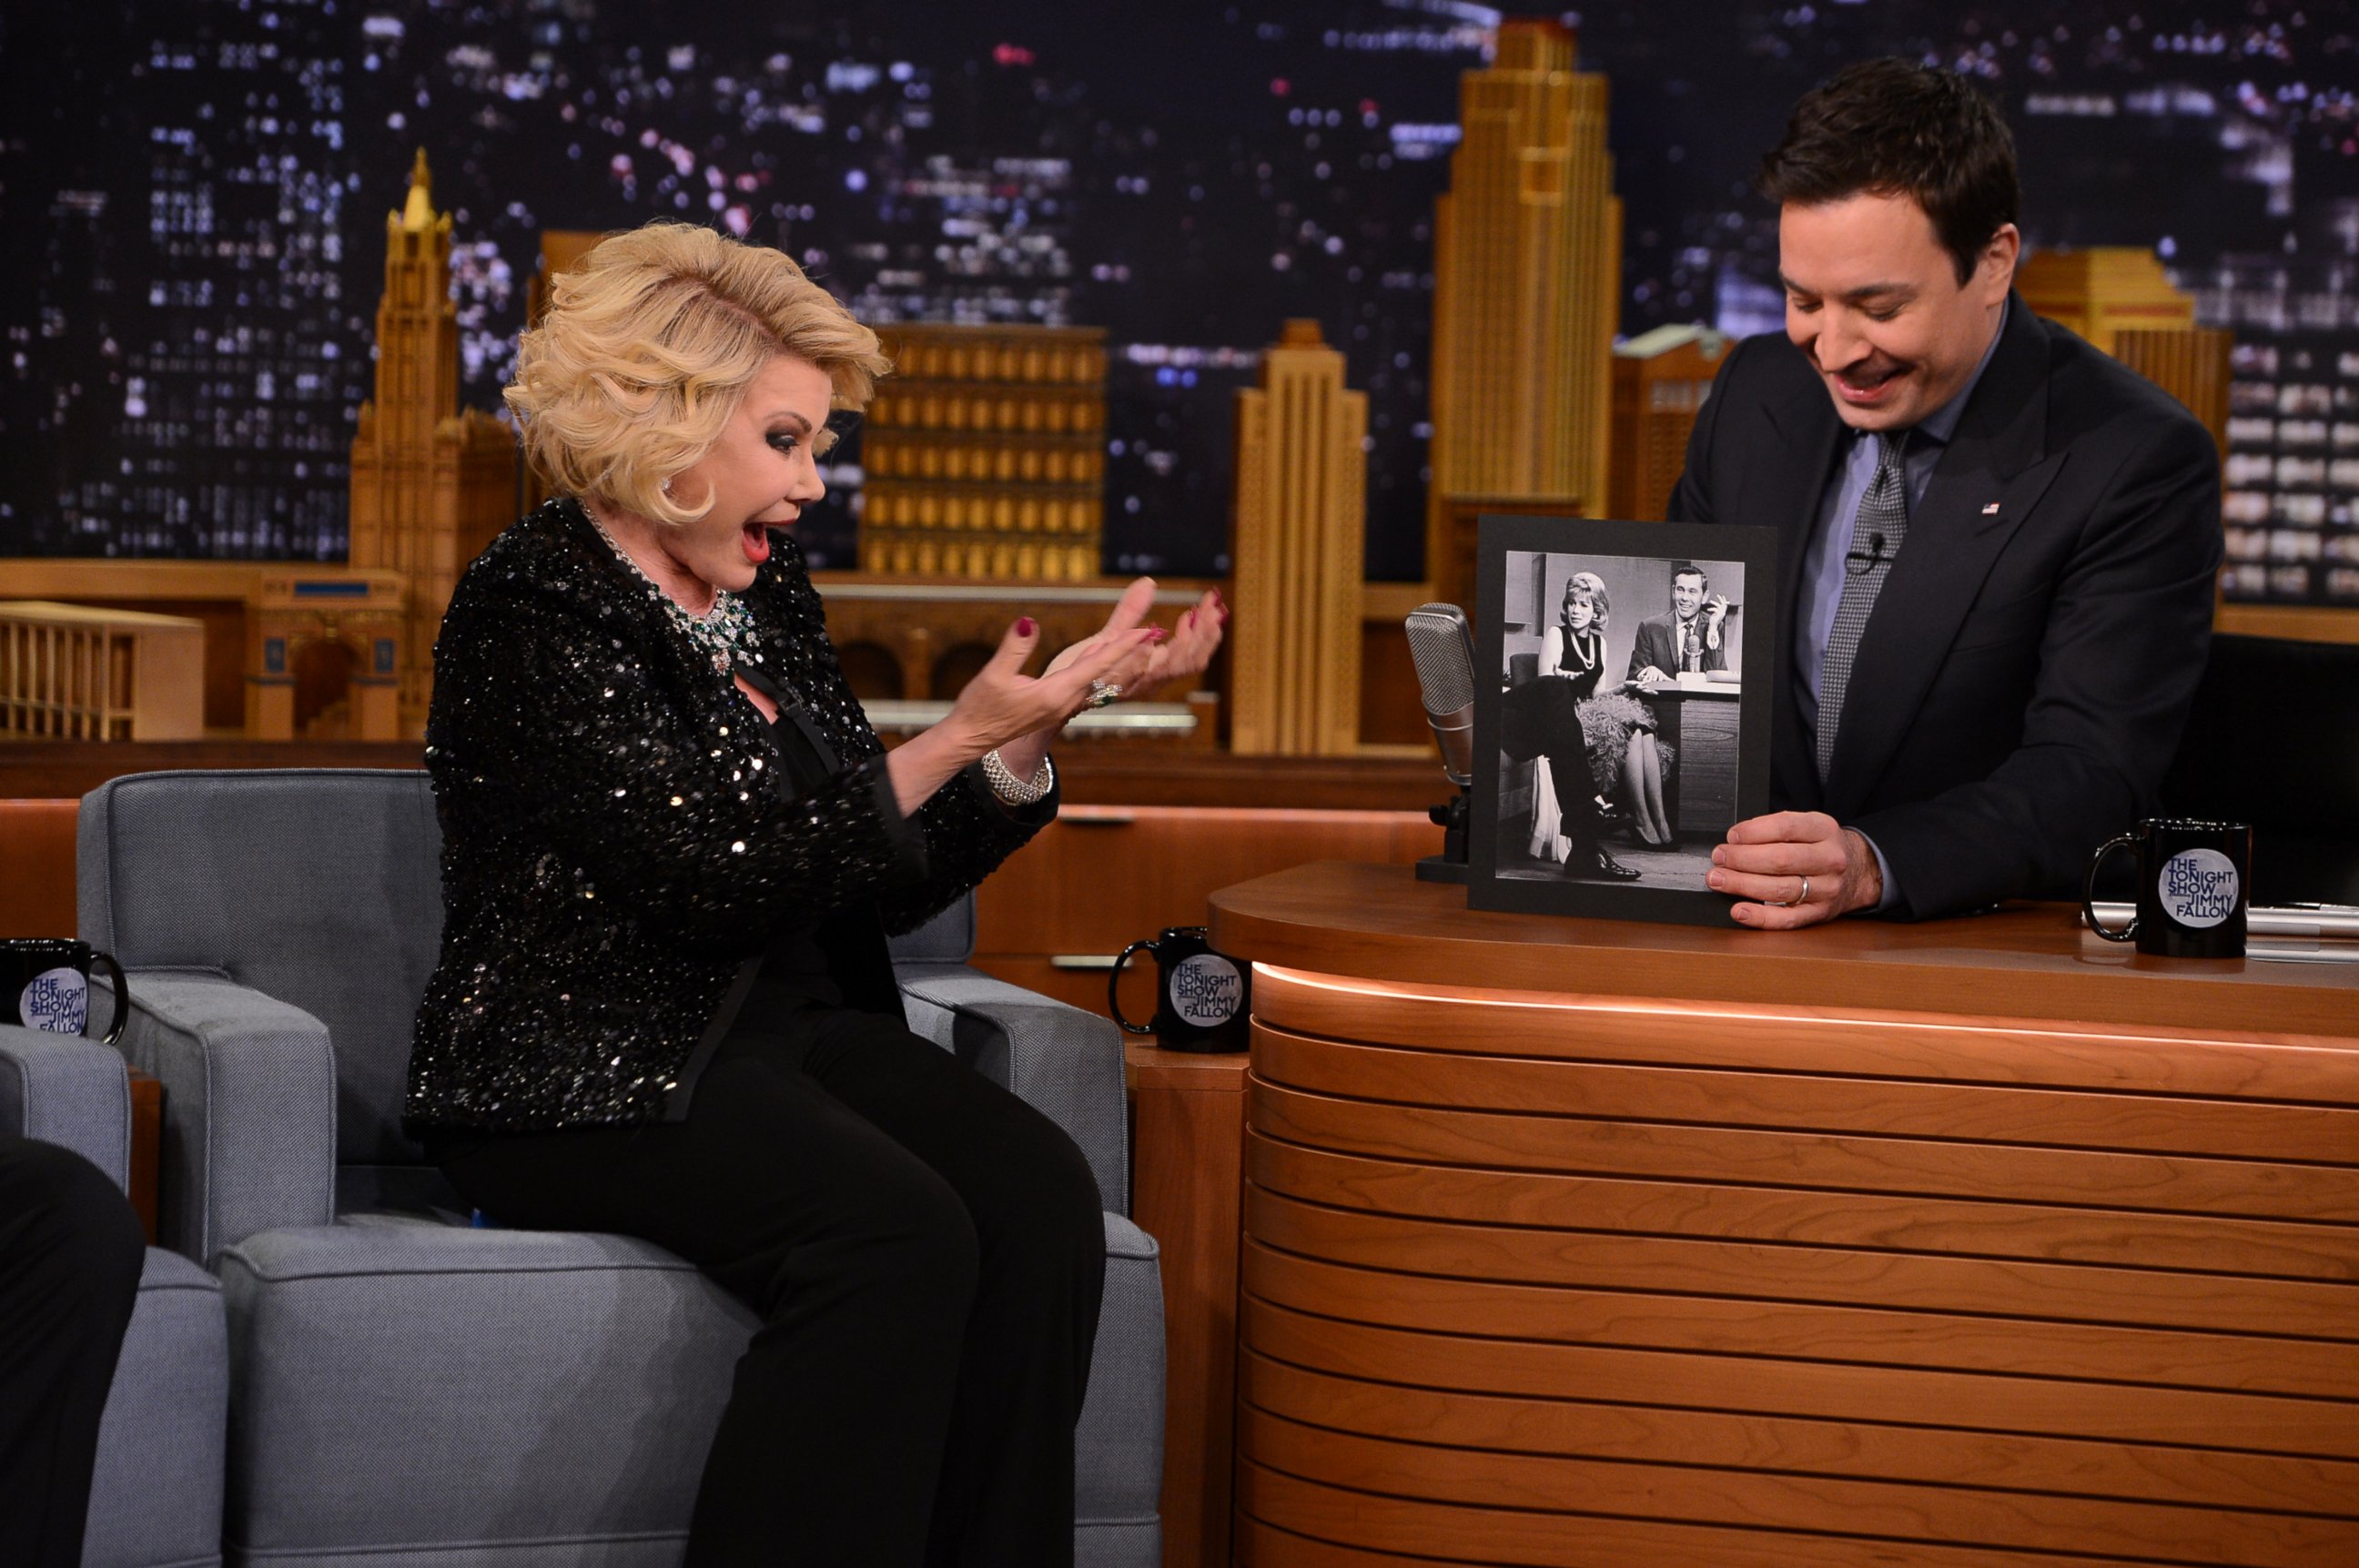 PHOTO: This March 27, 2014 photo released by NBC shows comedian Joan Rivers, left, with host Jimmy Fallon, during an appearance on "The Tonight Show Starring Jimmy Fallon," in New York.